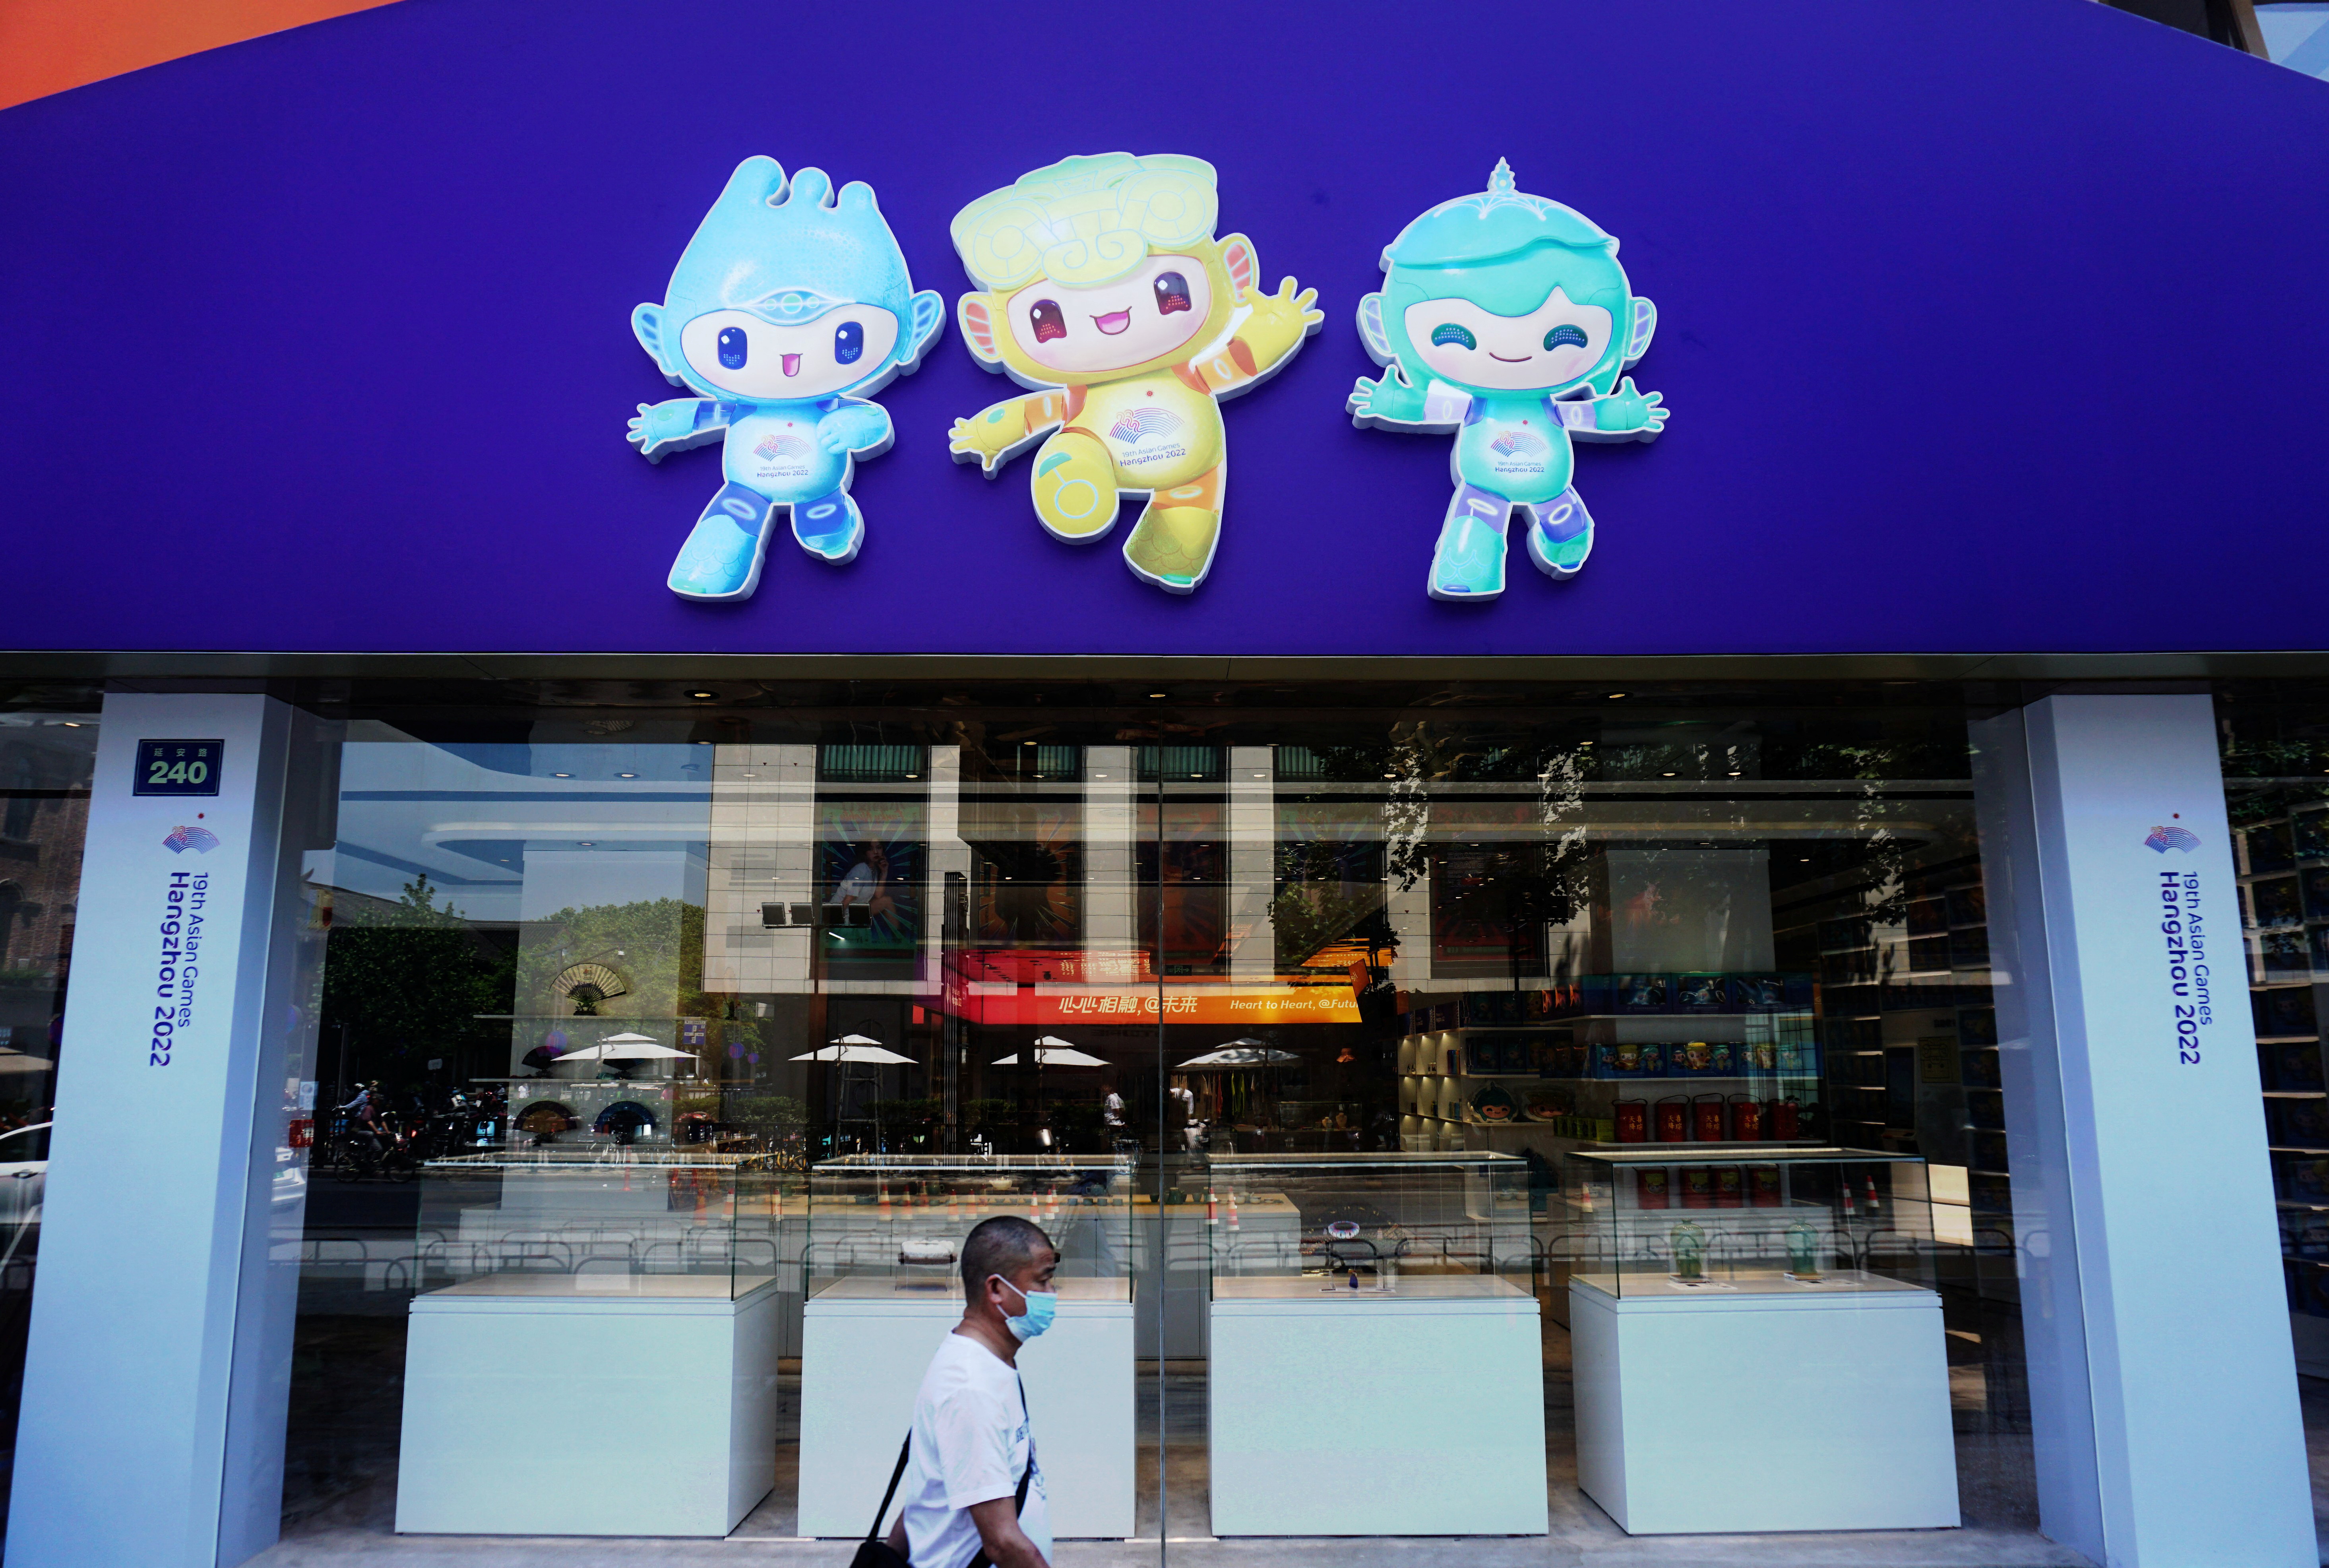 A person wearing a protective mask walks past a souvenir store for the 19th Asian Games Hangzhou 2022, amid the coronavirus disease (COVID-19) outbreak, in Hangzhou, Zhejiang province, China May 6, 2022.  China Daily via REUTERS ATTENTION EDITORS - THIS PICTURE WAS PROVIDED BY A THIRD PARTY. CHINA OUT. NO COMMERCIAL OR EDITORIAL SALES IN CHINA.